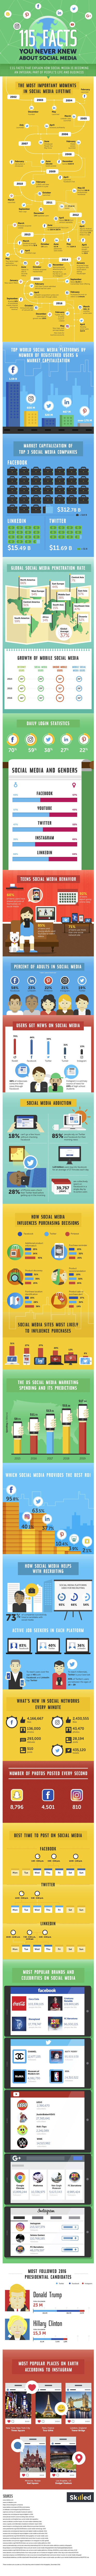 Social Media Facts Infographic